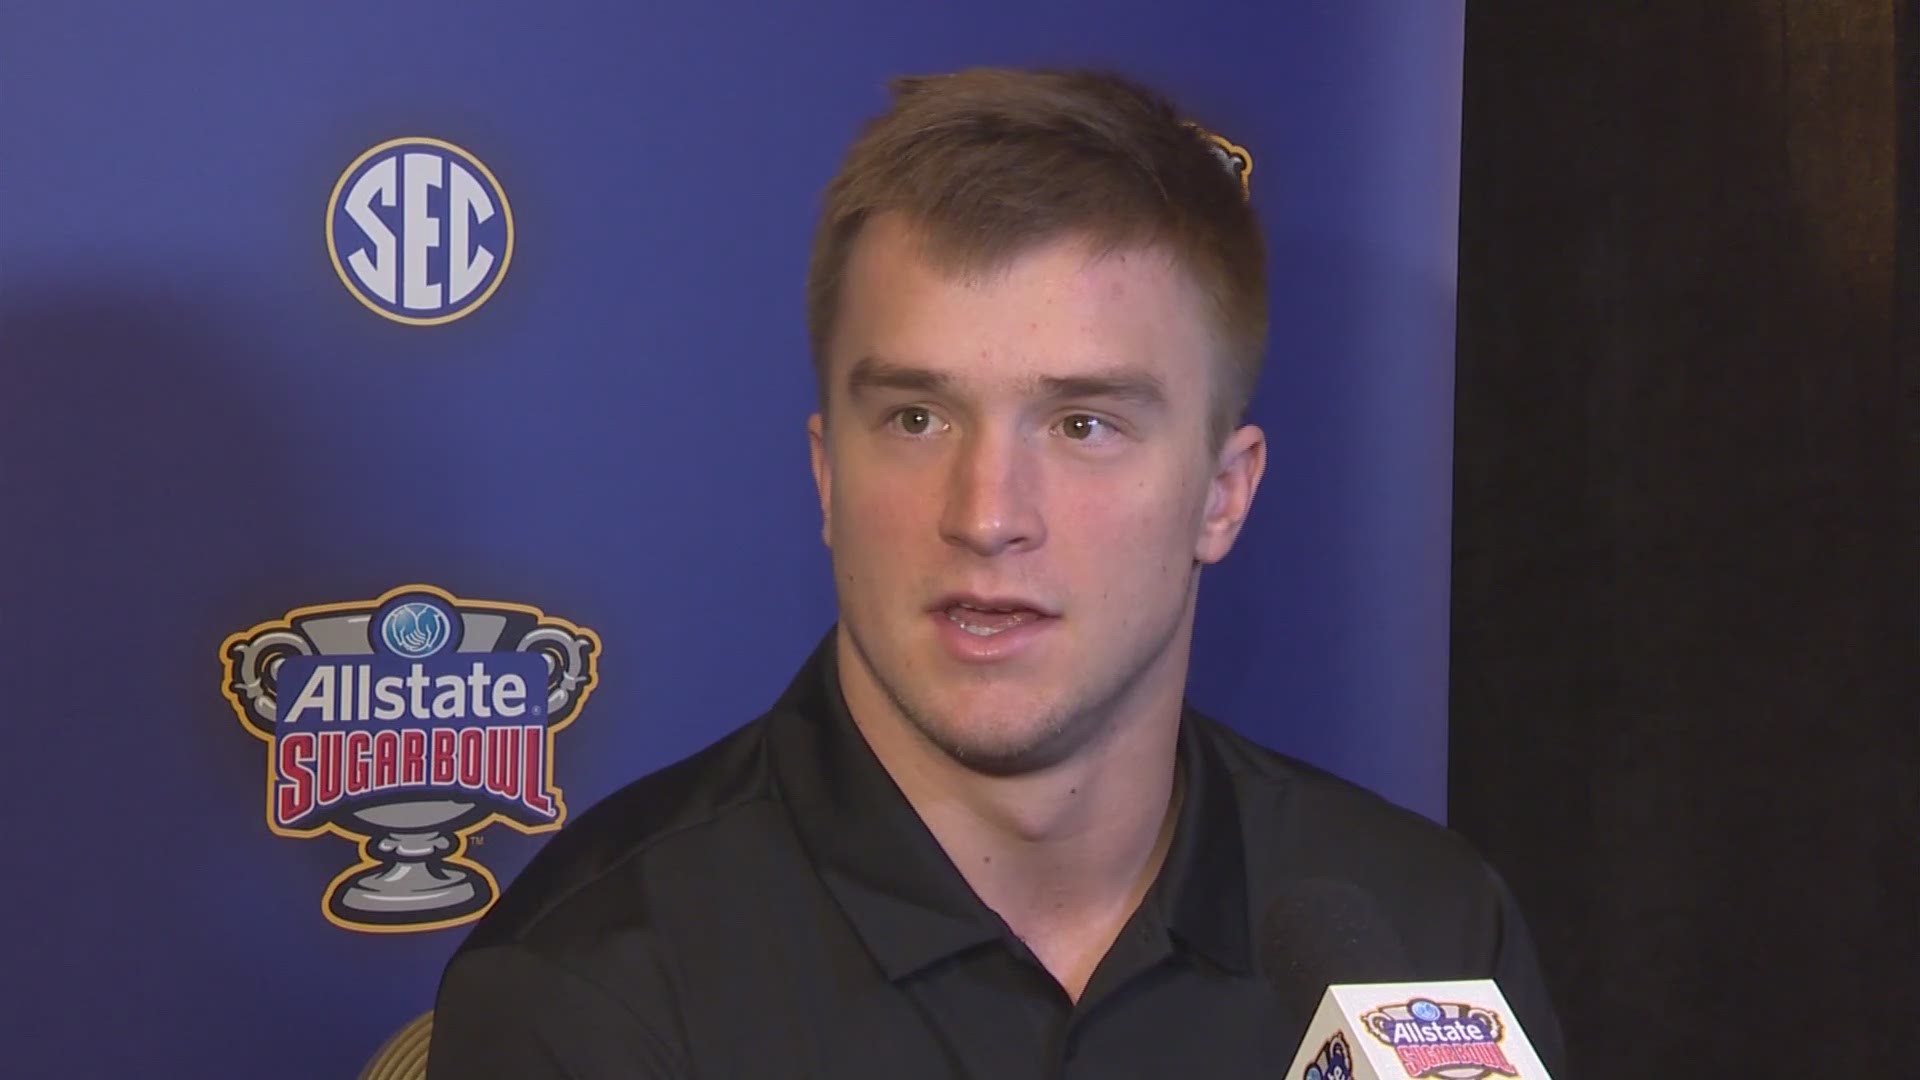 Sam Ehlinger reacts to playing in Drew Brees' house